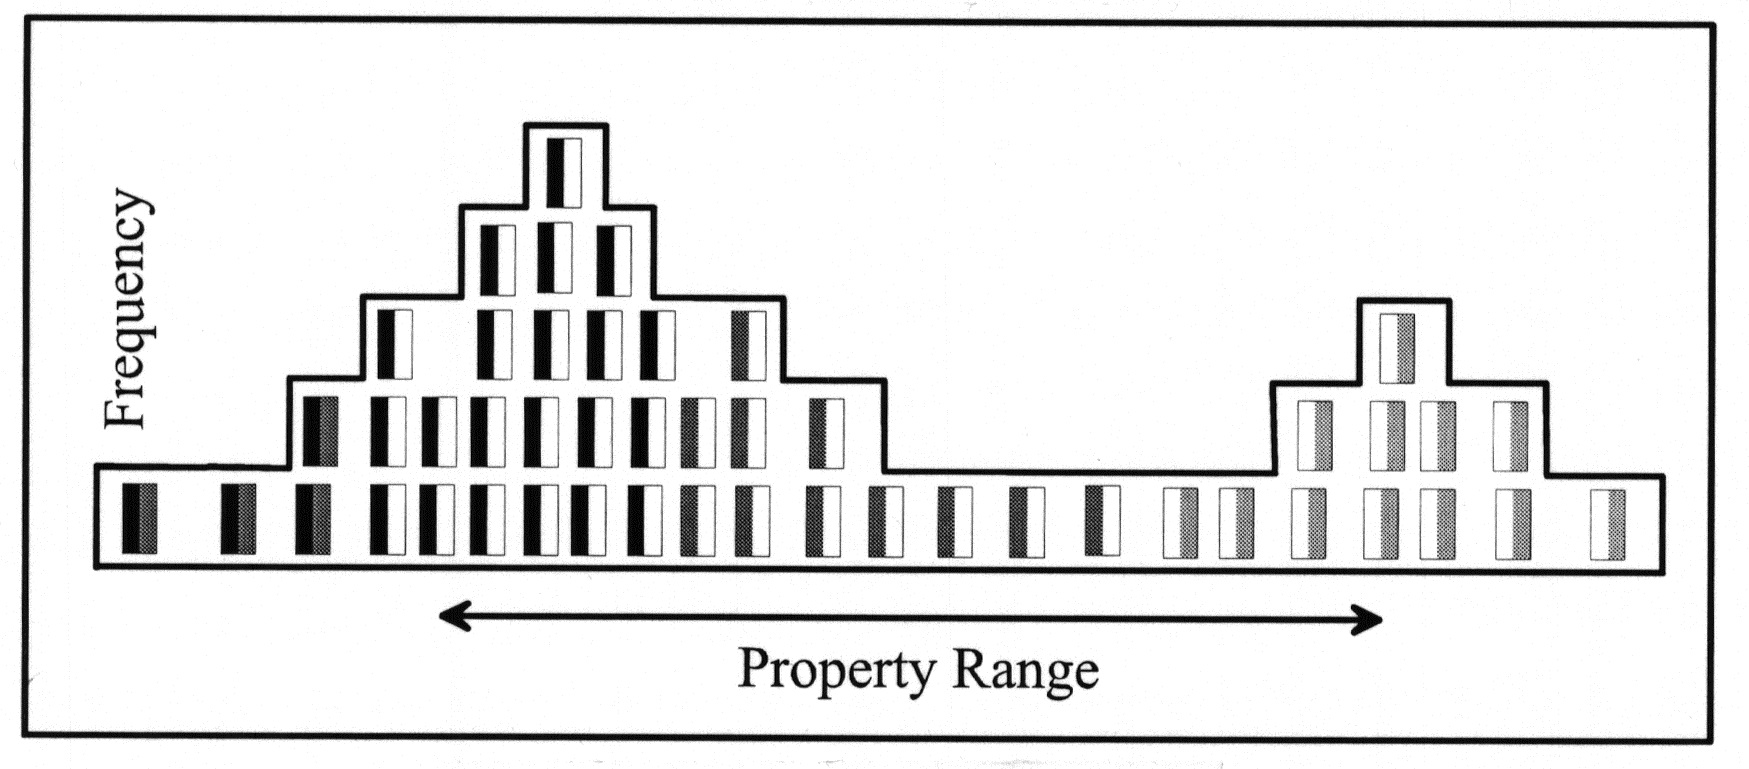 A two-dimensional array for assessing frequency of occurrence of a single property. 